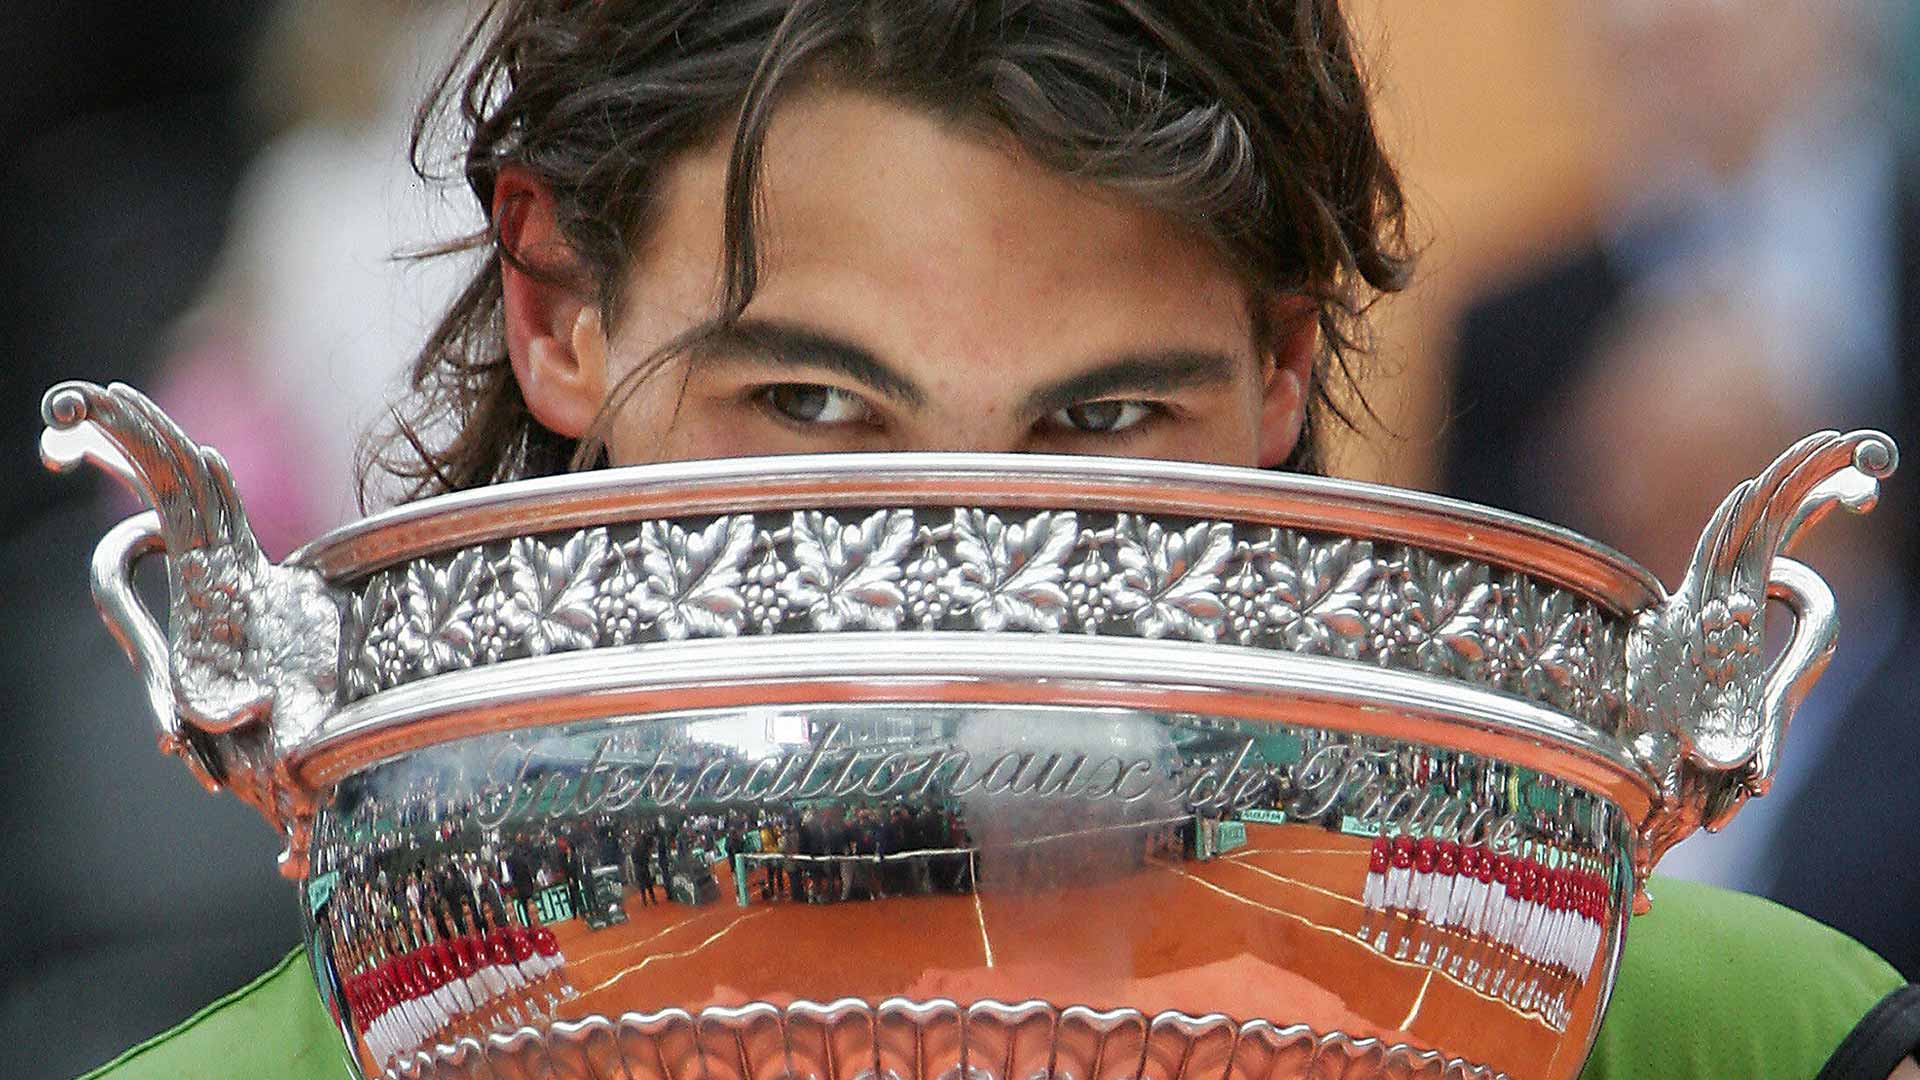 Rafael Nadal wins his first Grand Slam title at the 2005 French Open